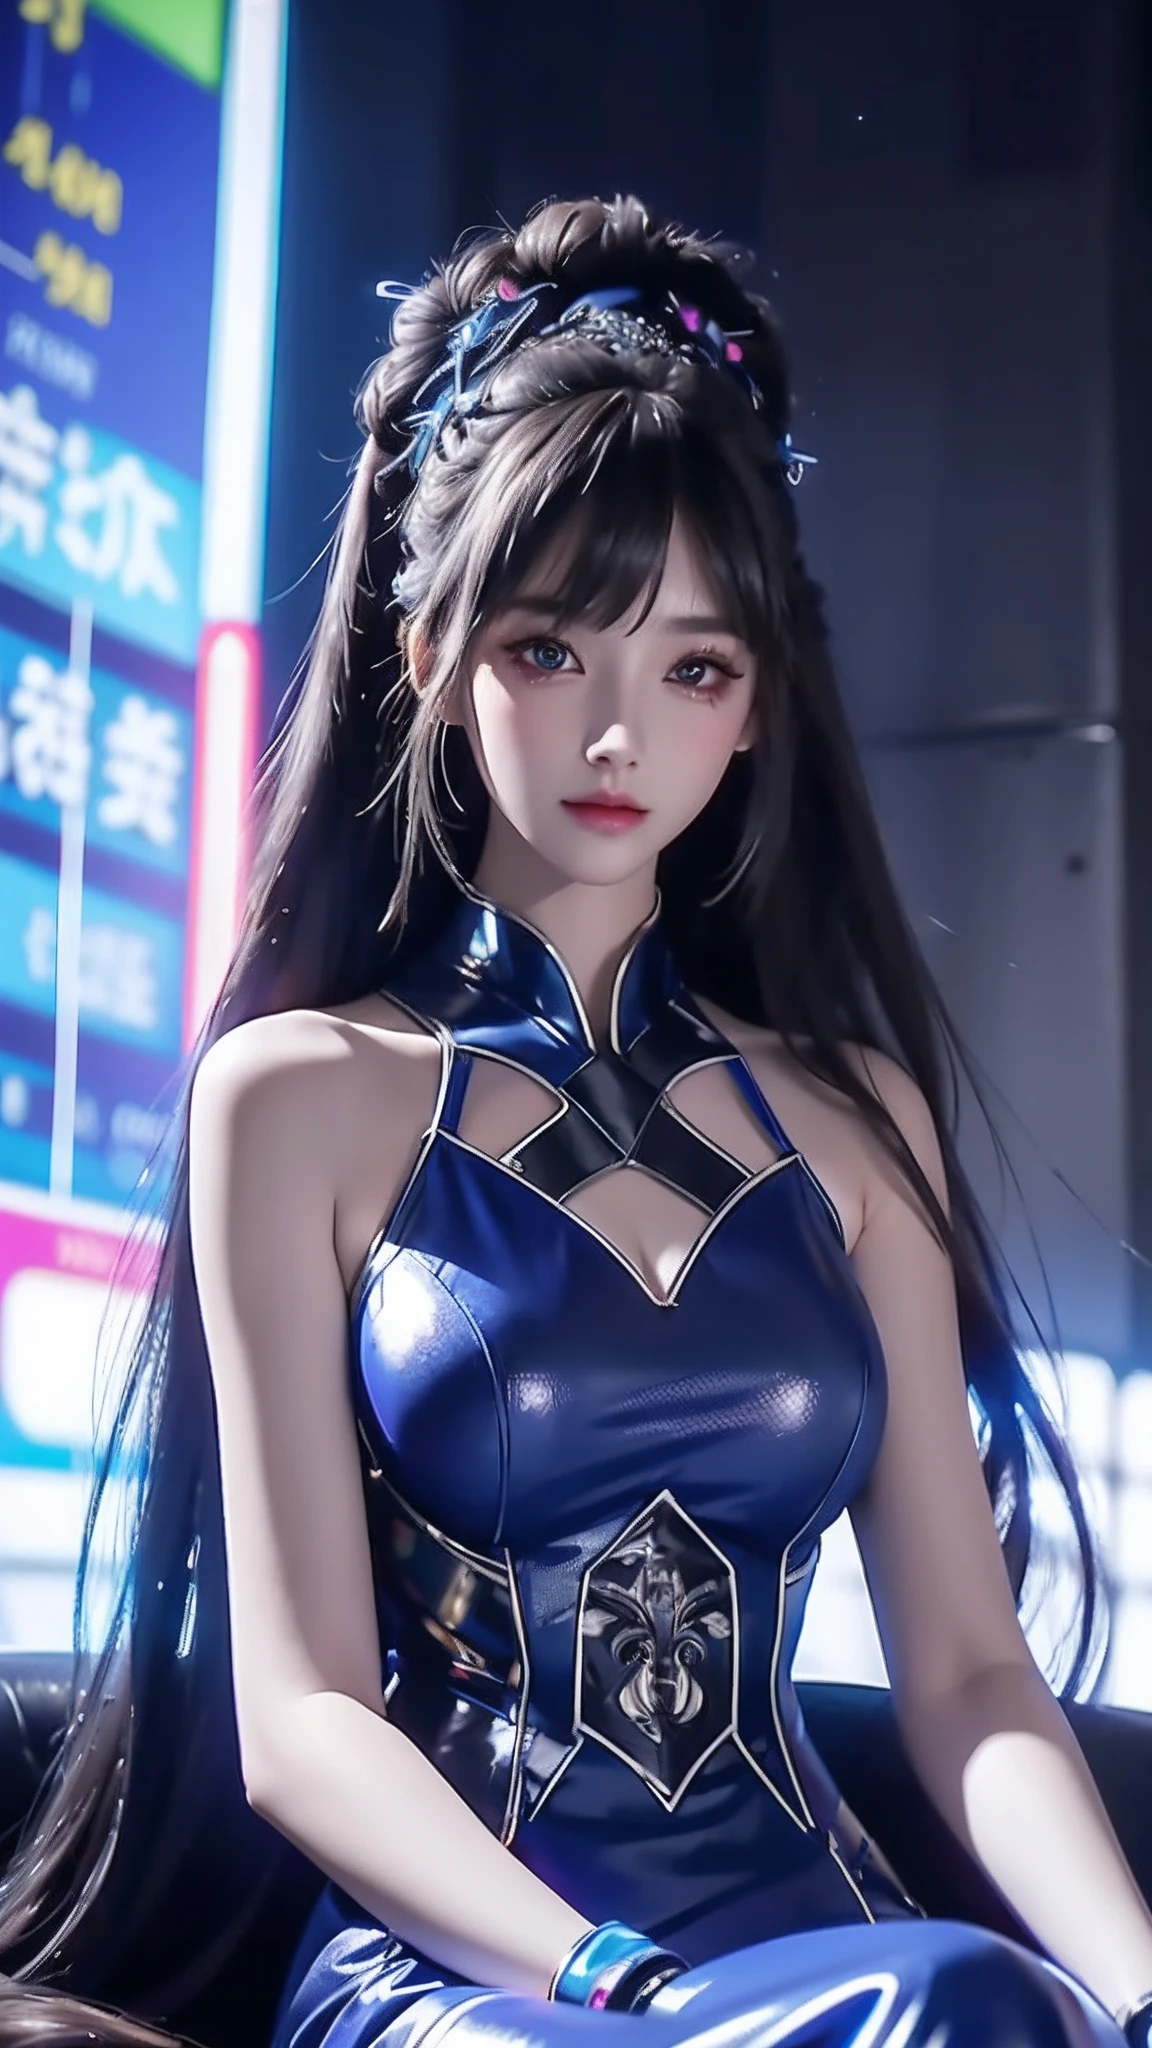 4k ultra hd, masterpiece, high details, a girl, cute face, detailed eyes, long hair, blue neon lights on dress, Cyberpunk blue dress, blue neon lights connected on dress, neon breasts, bare stomach, spreading light, light reflection, light reflection on road, light reflection, everywhere spreading lights, neon lights, sitting, whole body capture,